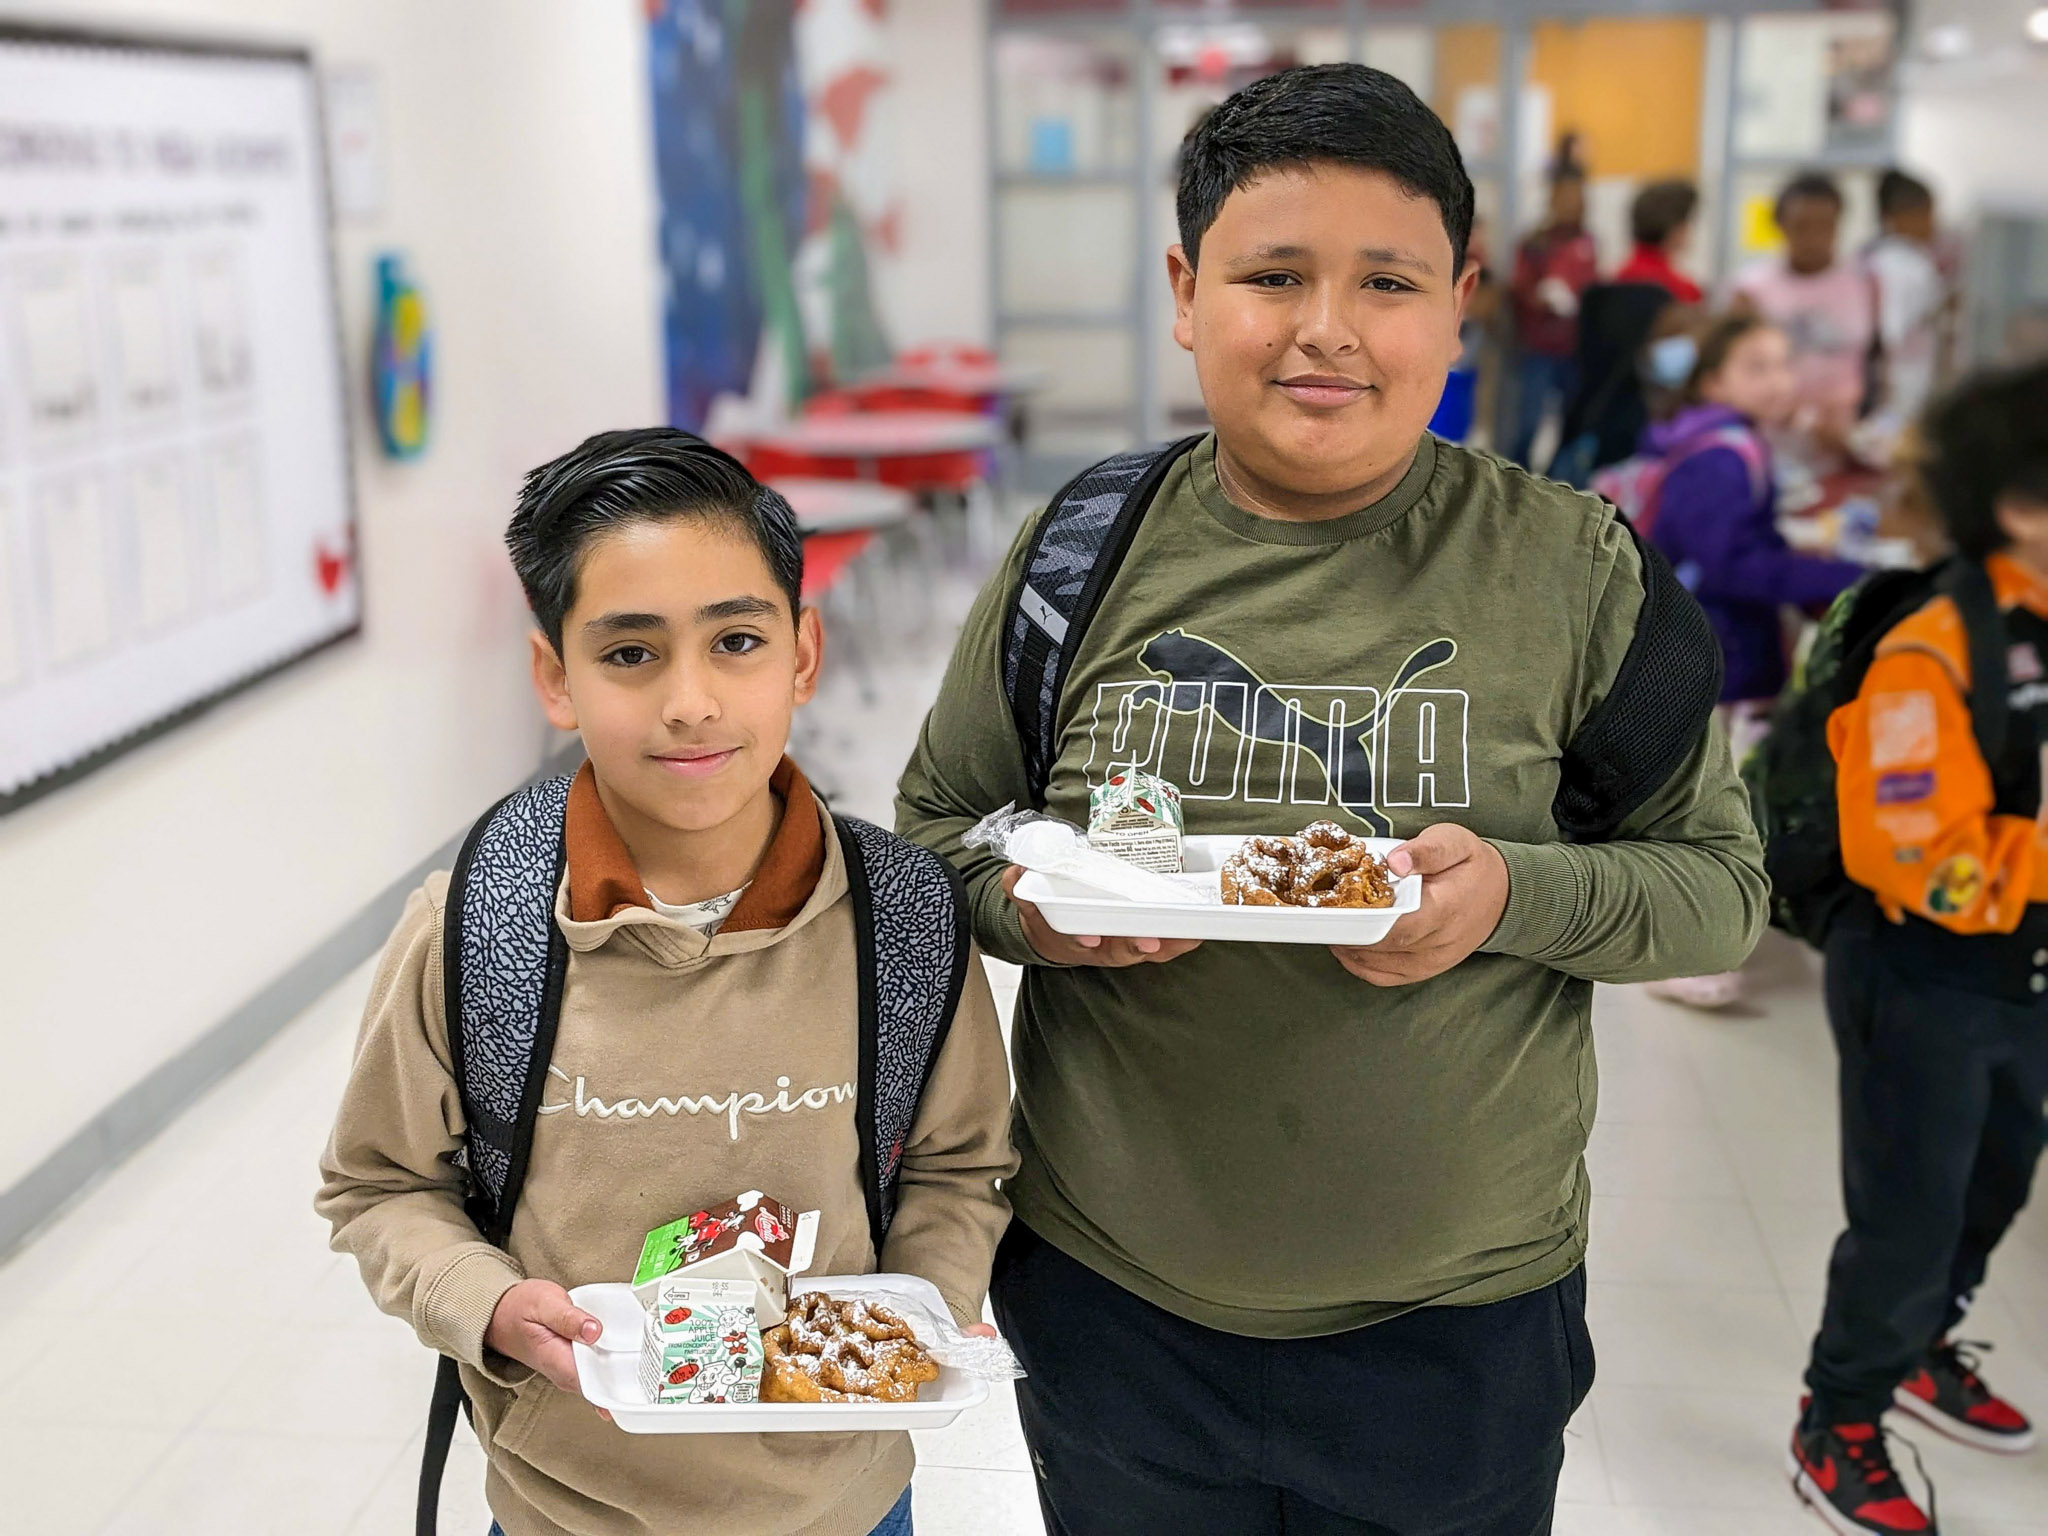 Two elementary students holding trays of food in the cafeteria